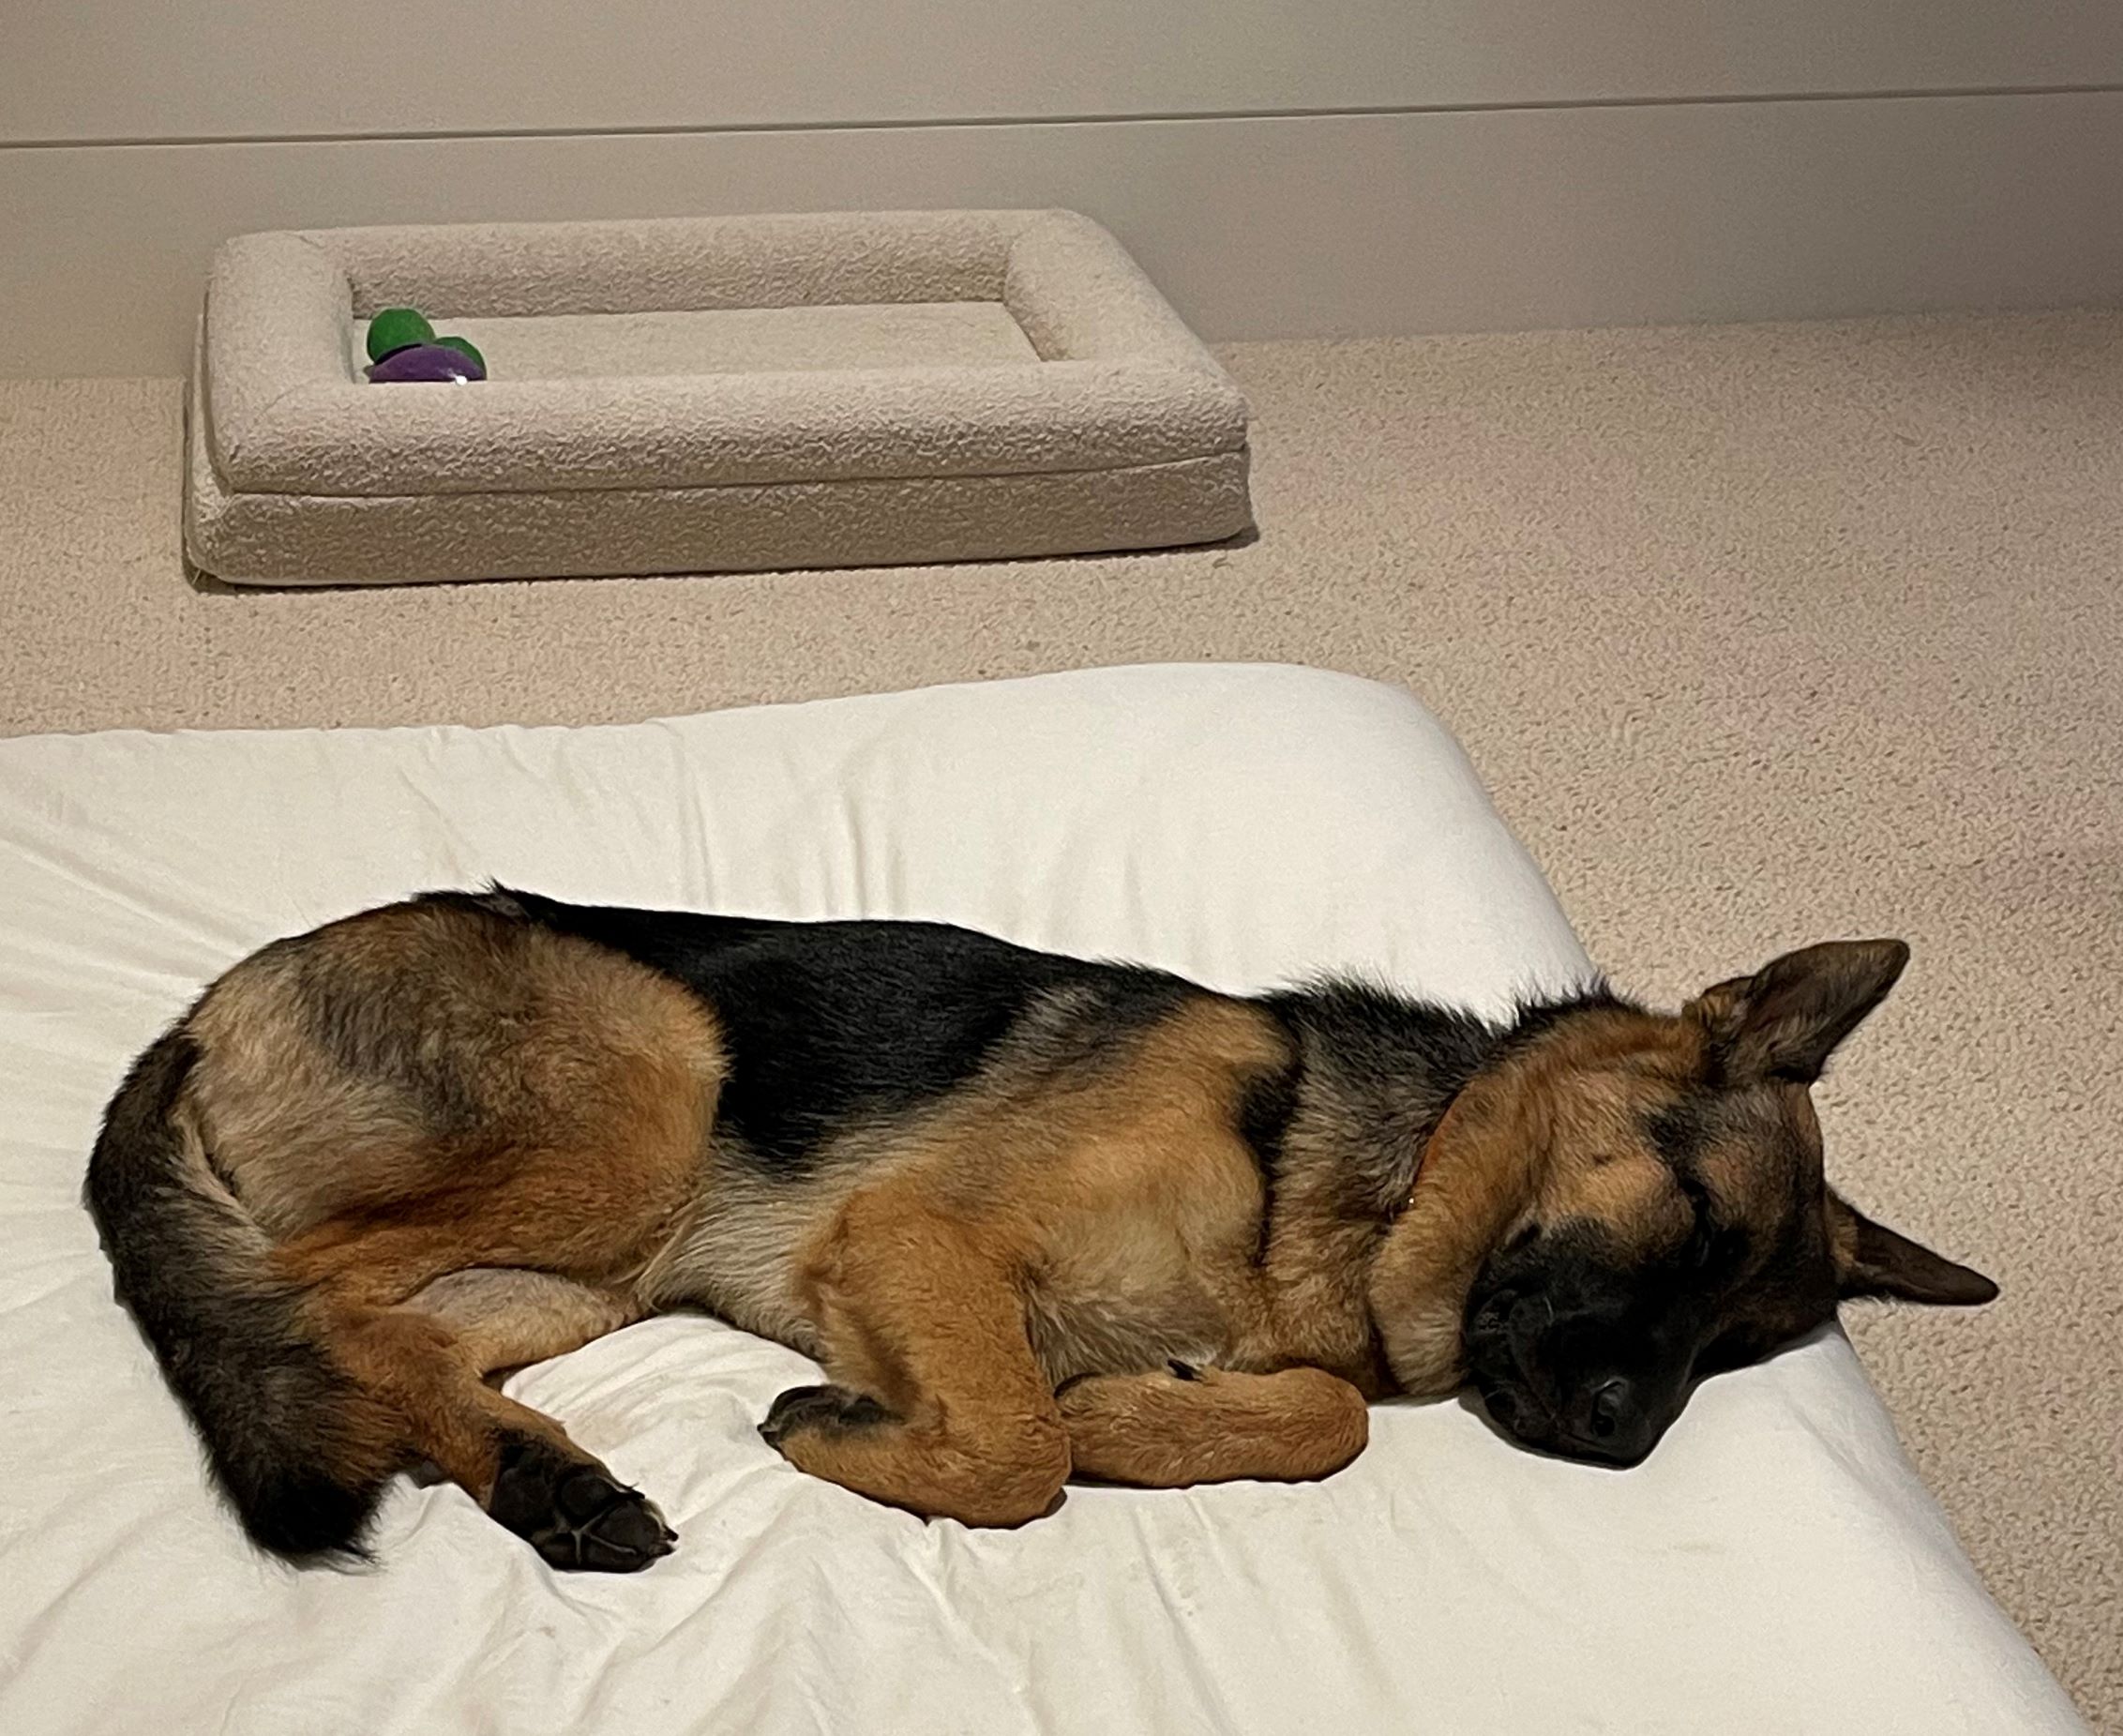 German Shepherd Puppy recovering from big day shopping